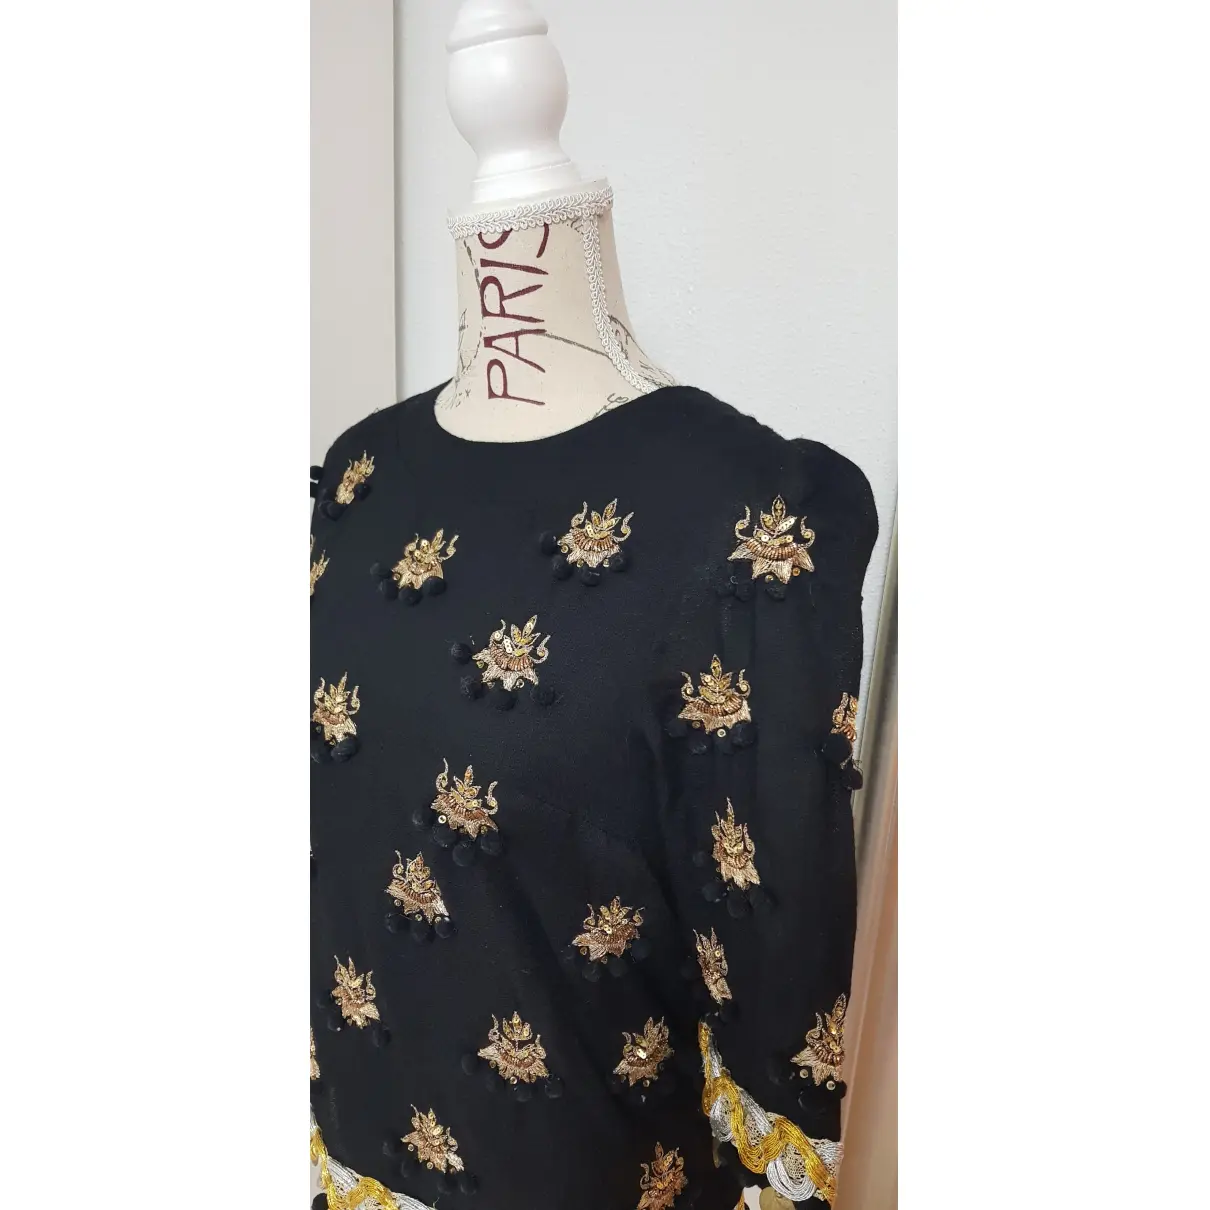 Manoush Wool blouse for sale